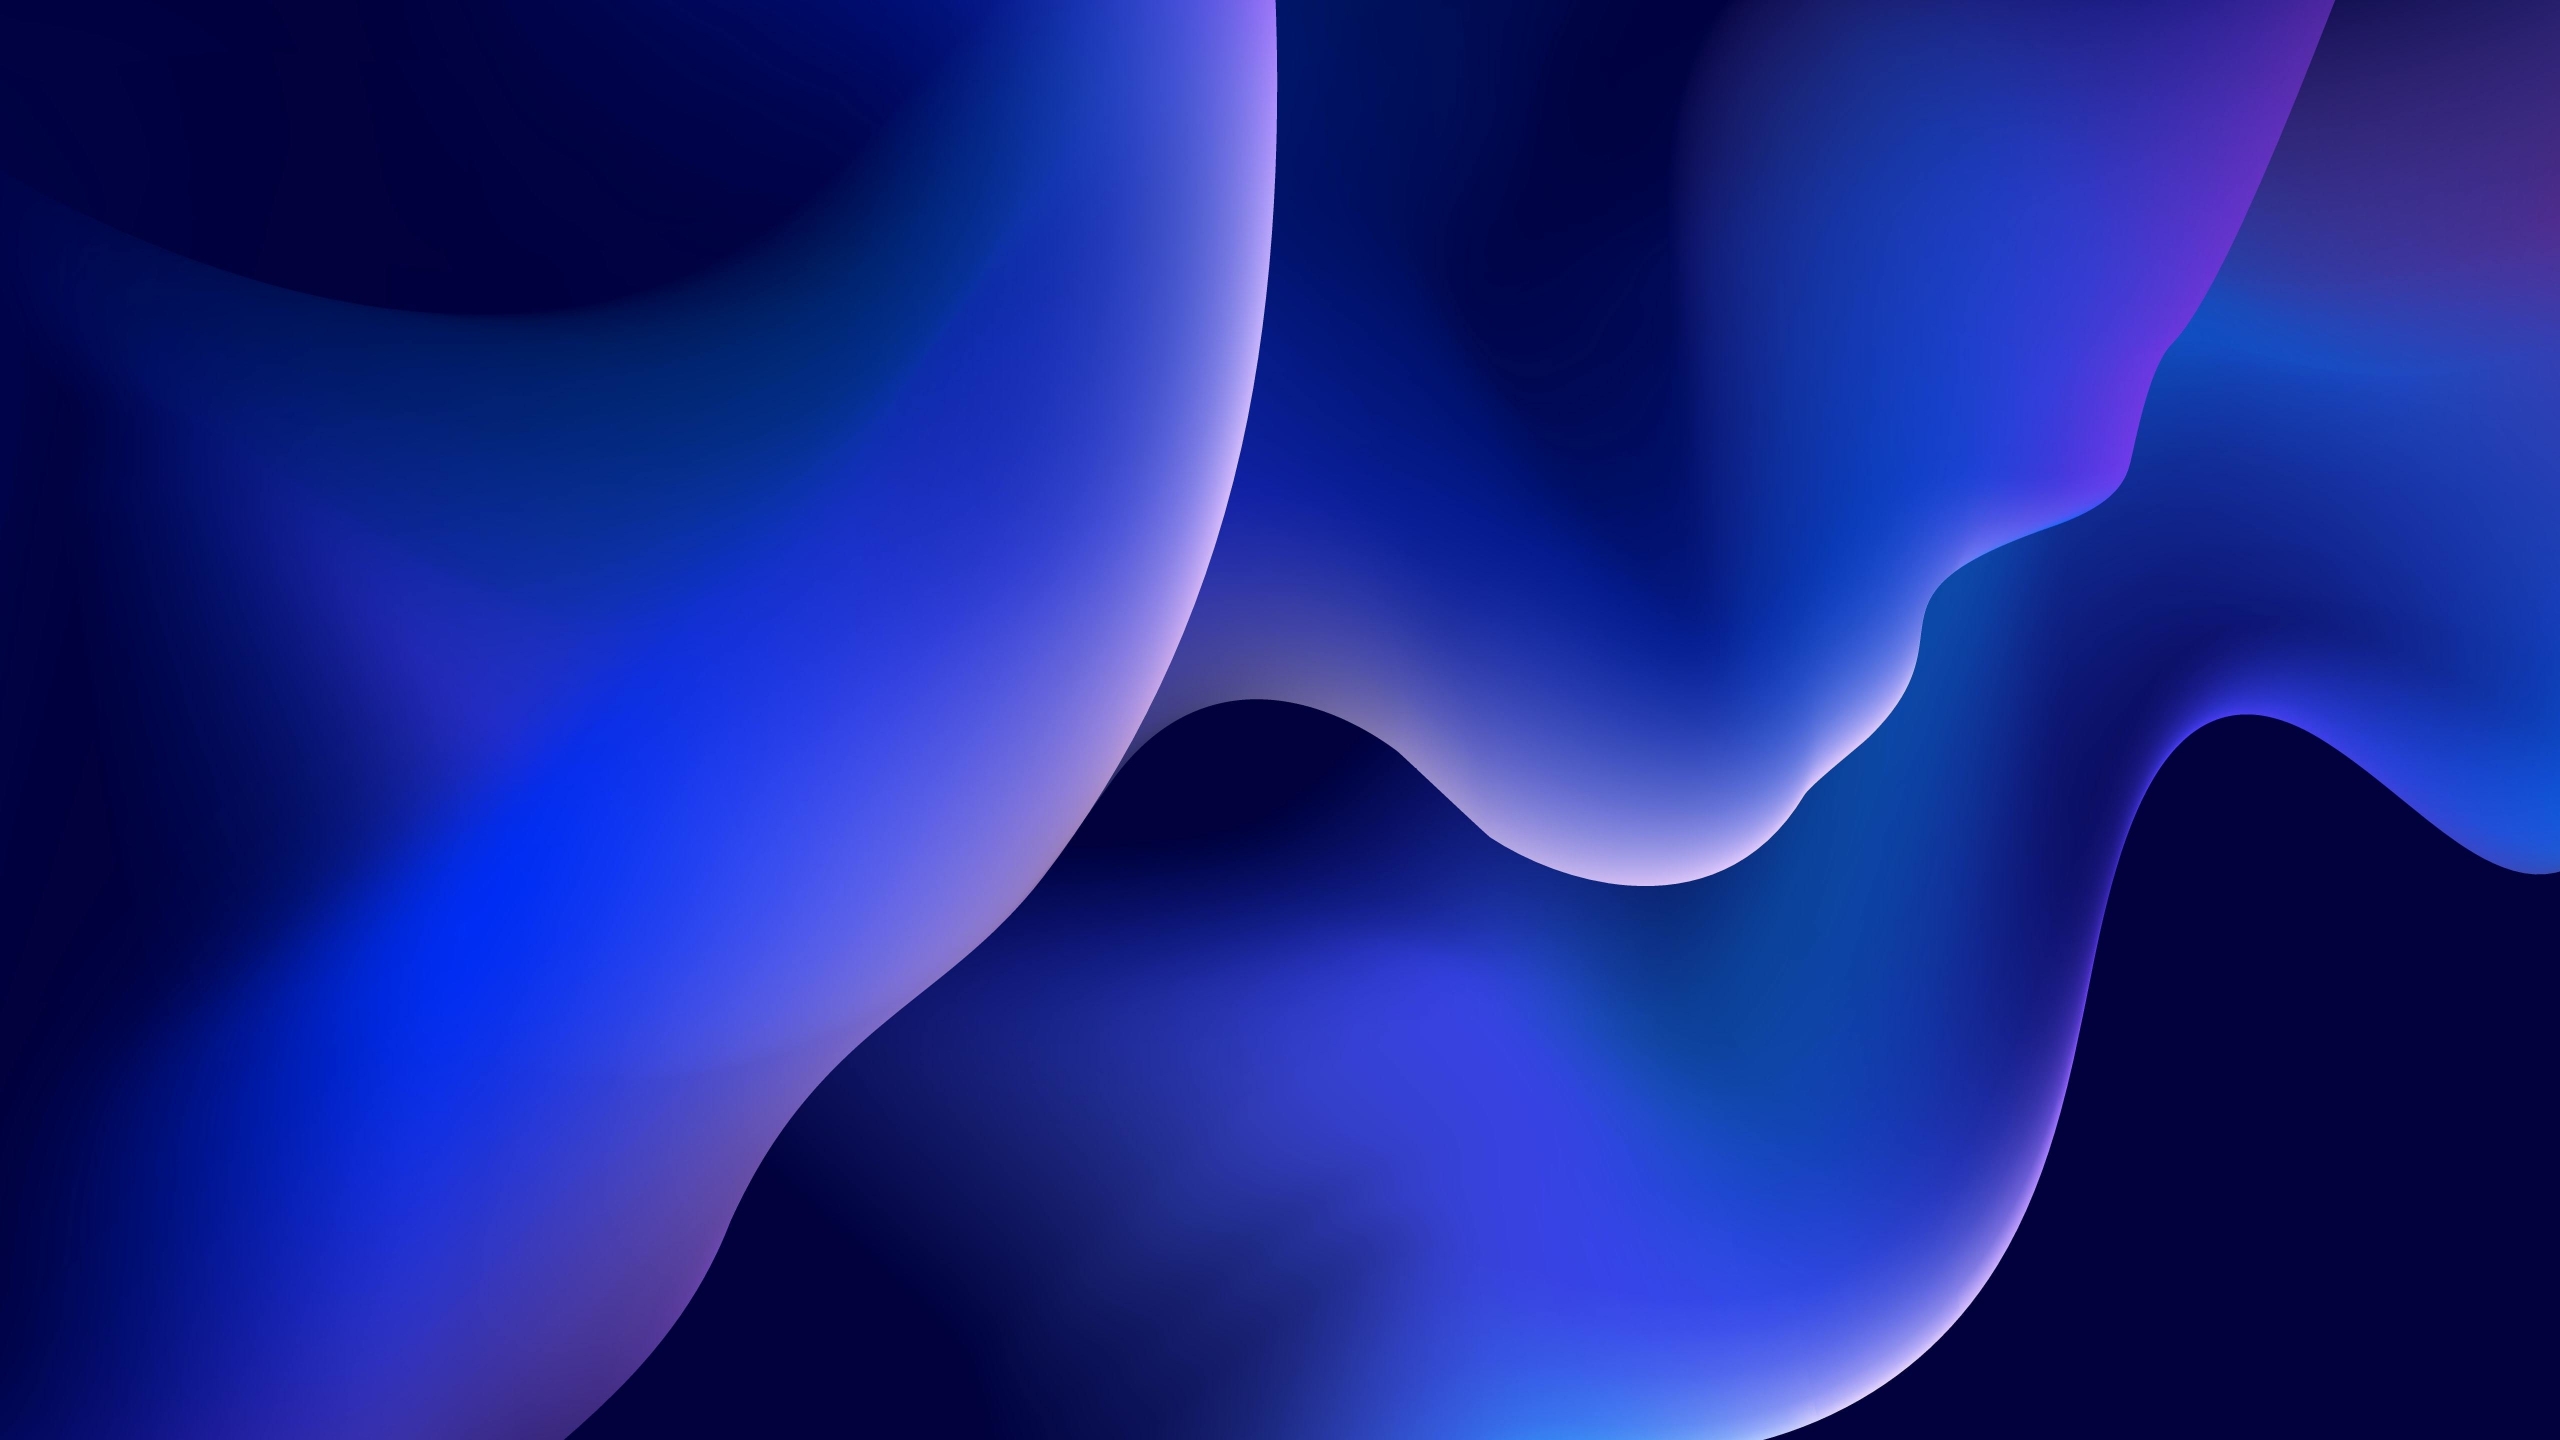 Download 2560x1440 wallpaper blue waves, abstraction, close up, dual ...